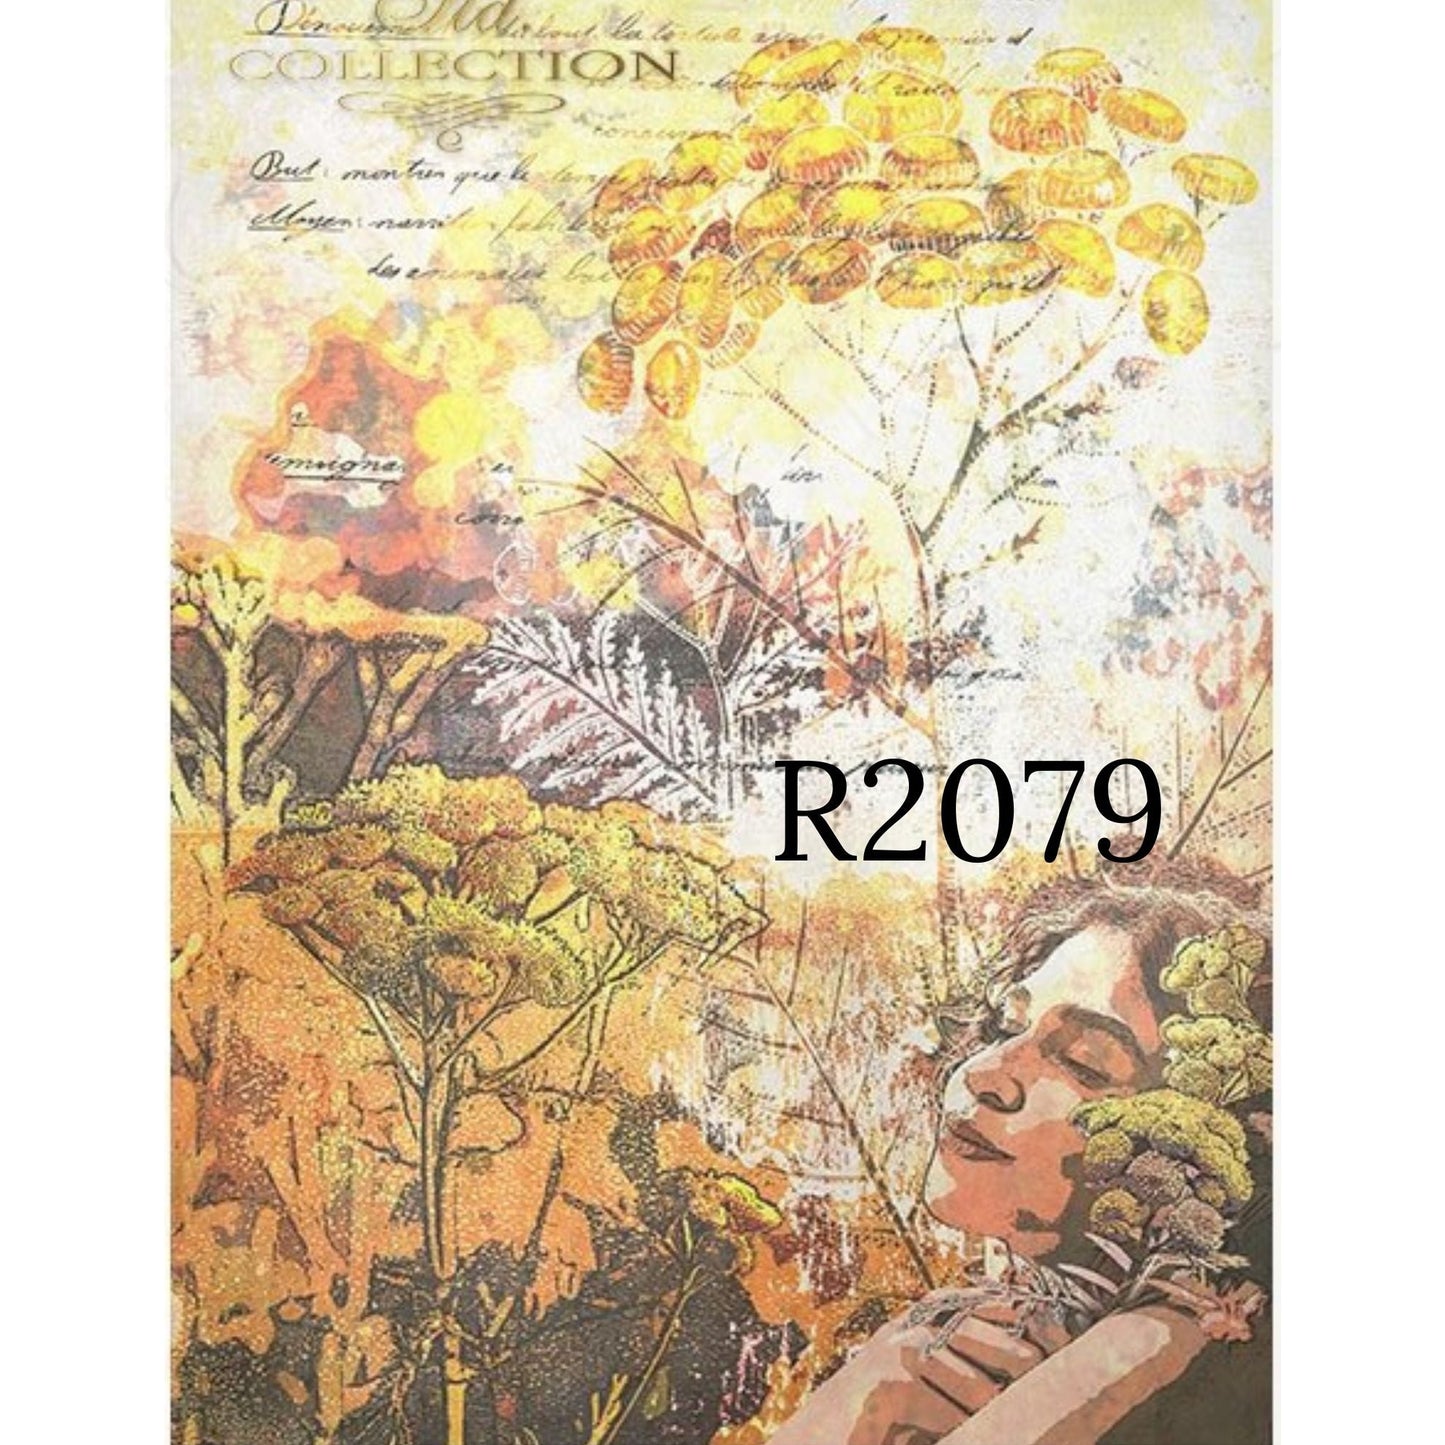 R2079 - Decoupage Rice Paper - woman's face, plants, tansy